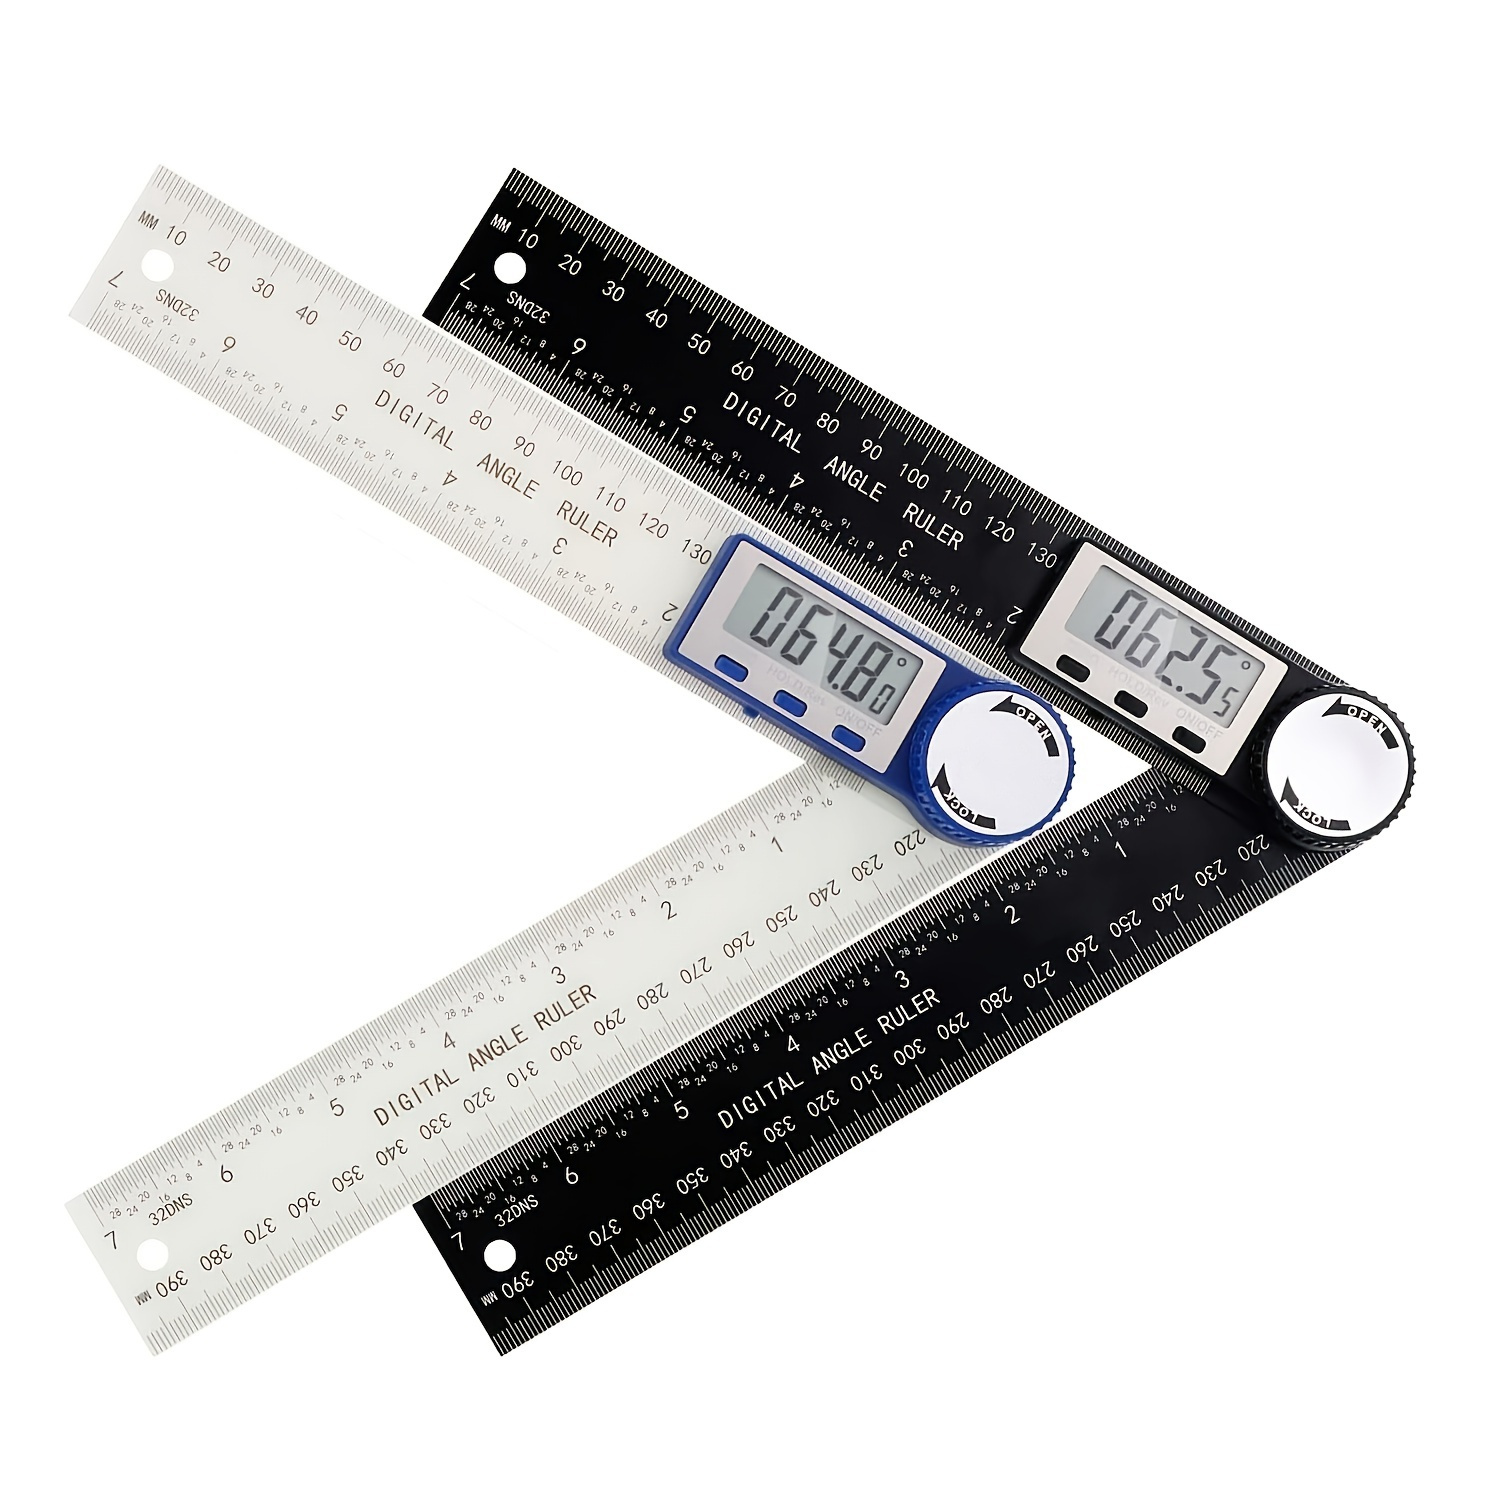 2-in-1 Digital Angle Ruler & Vernier Caliper: 360° Measuring Instrument for  Woodworking, Construction & Home Decoration